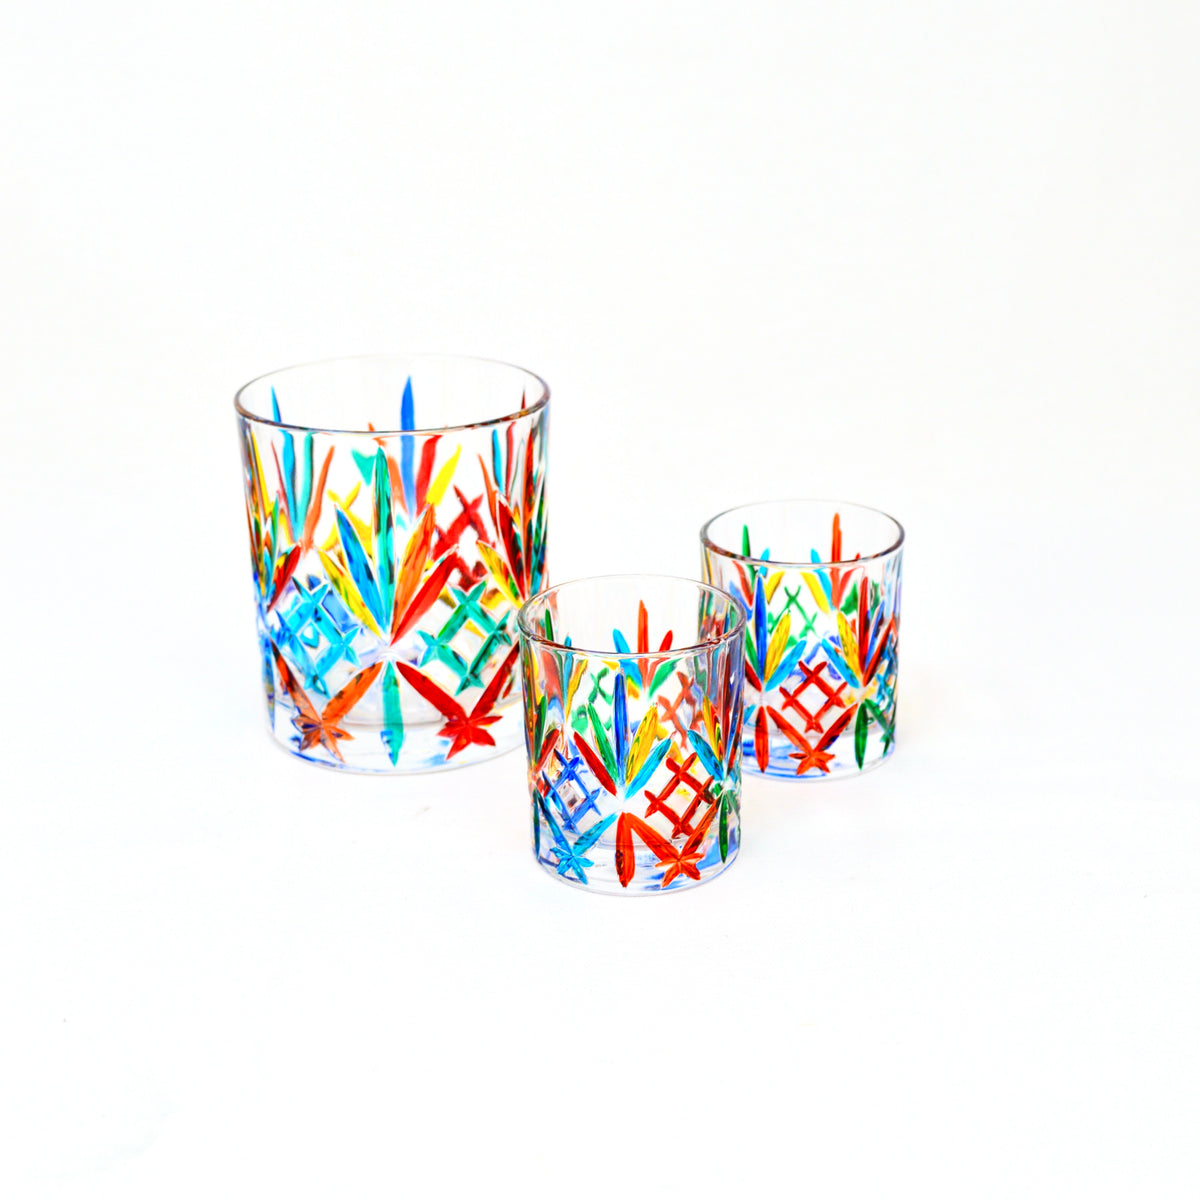 Melodia Shot Glasses, Set of 6, Hand Painted Crystal, Made in Italy - My Italian Decor